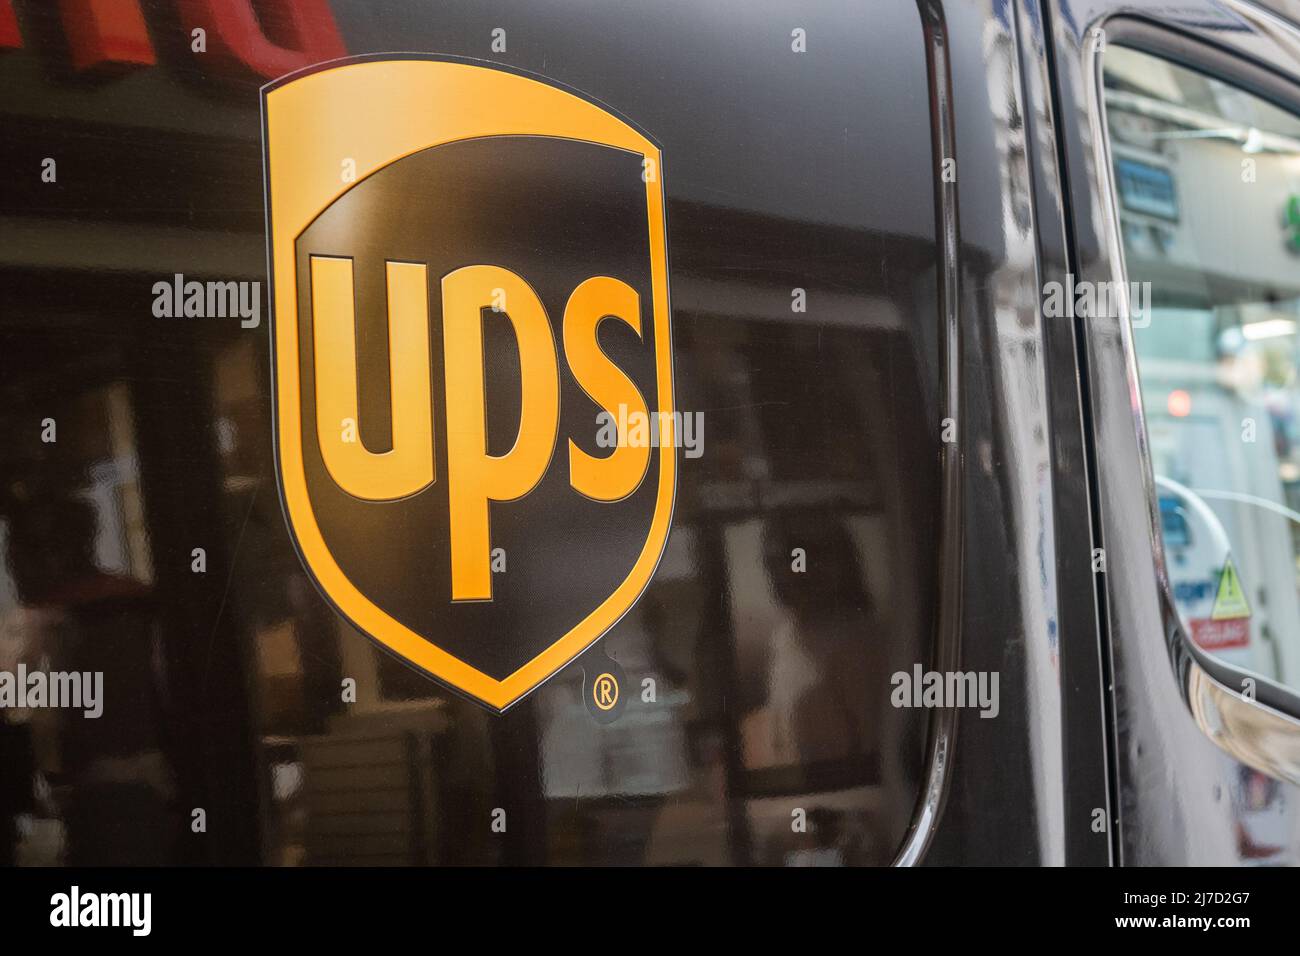 UPS logo on a delivery van in Cork, Ireland. Stock Photo